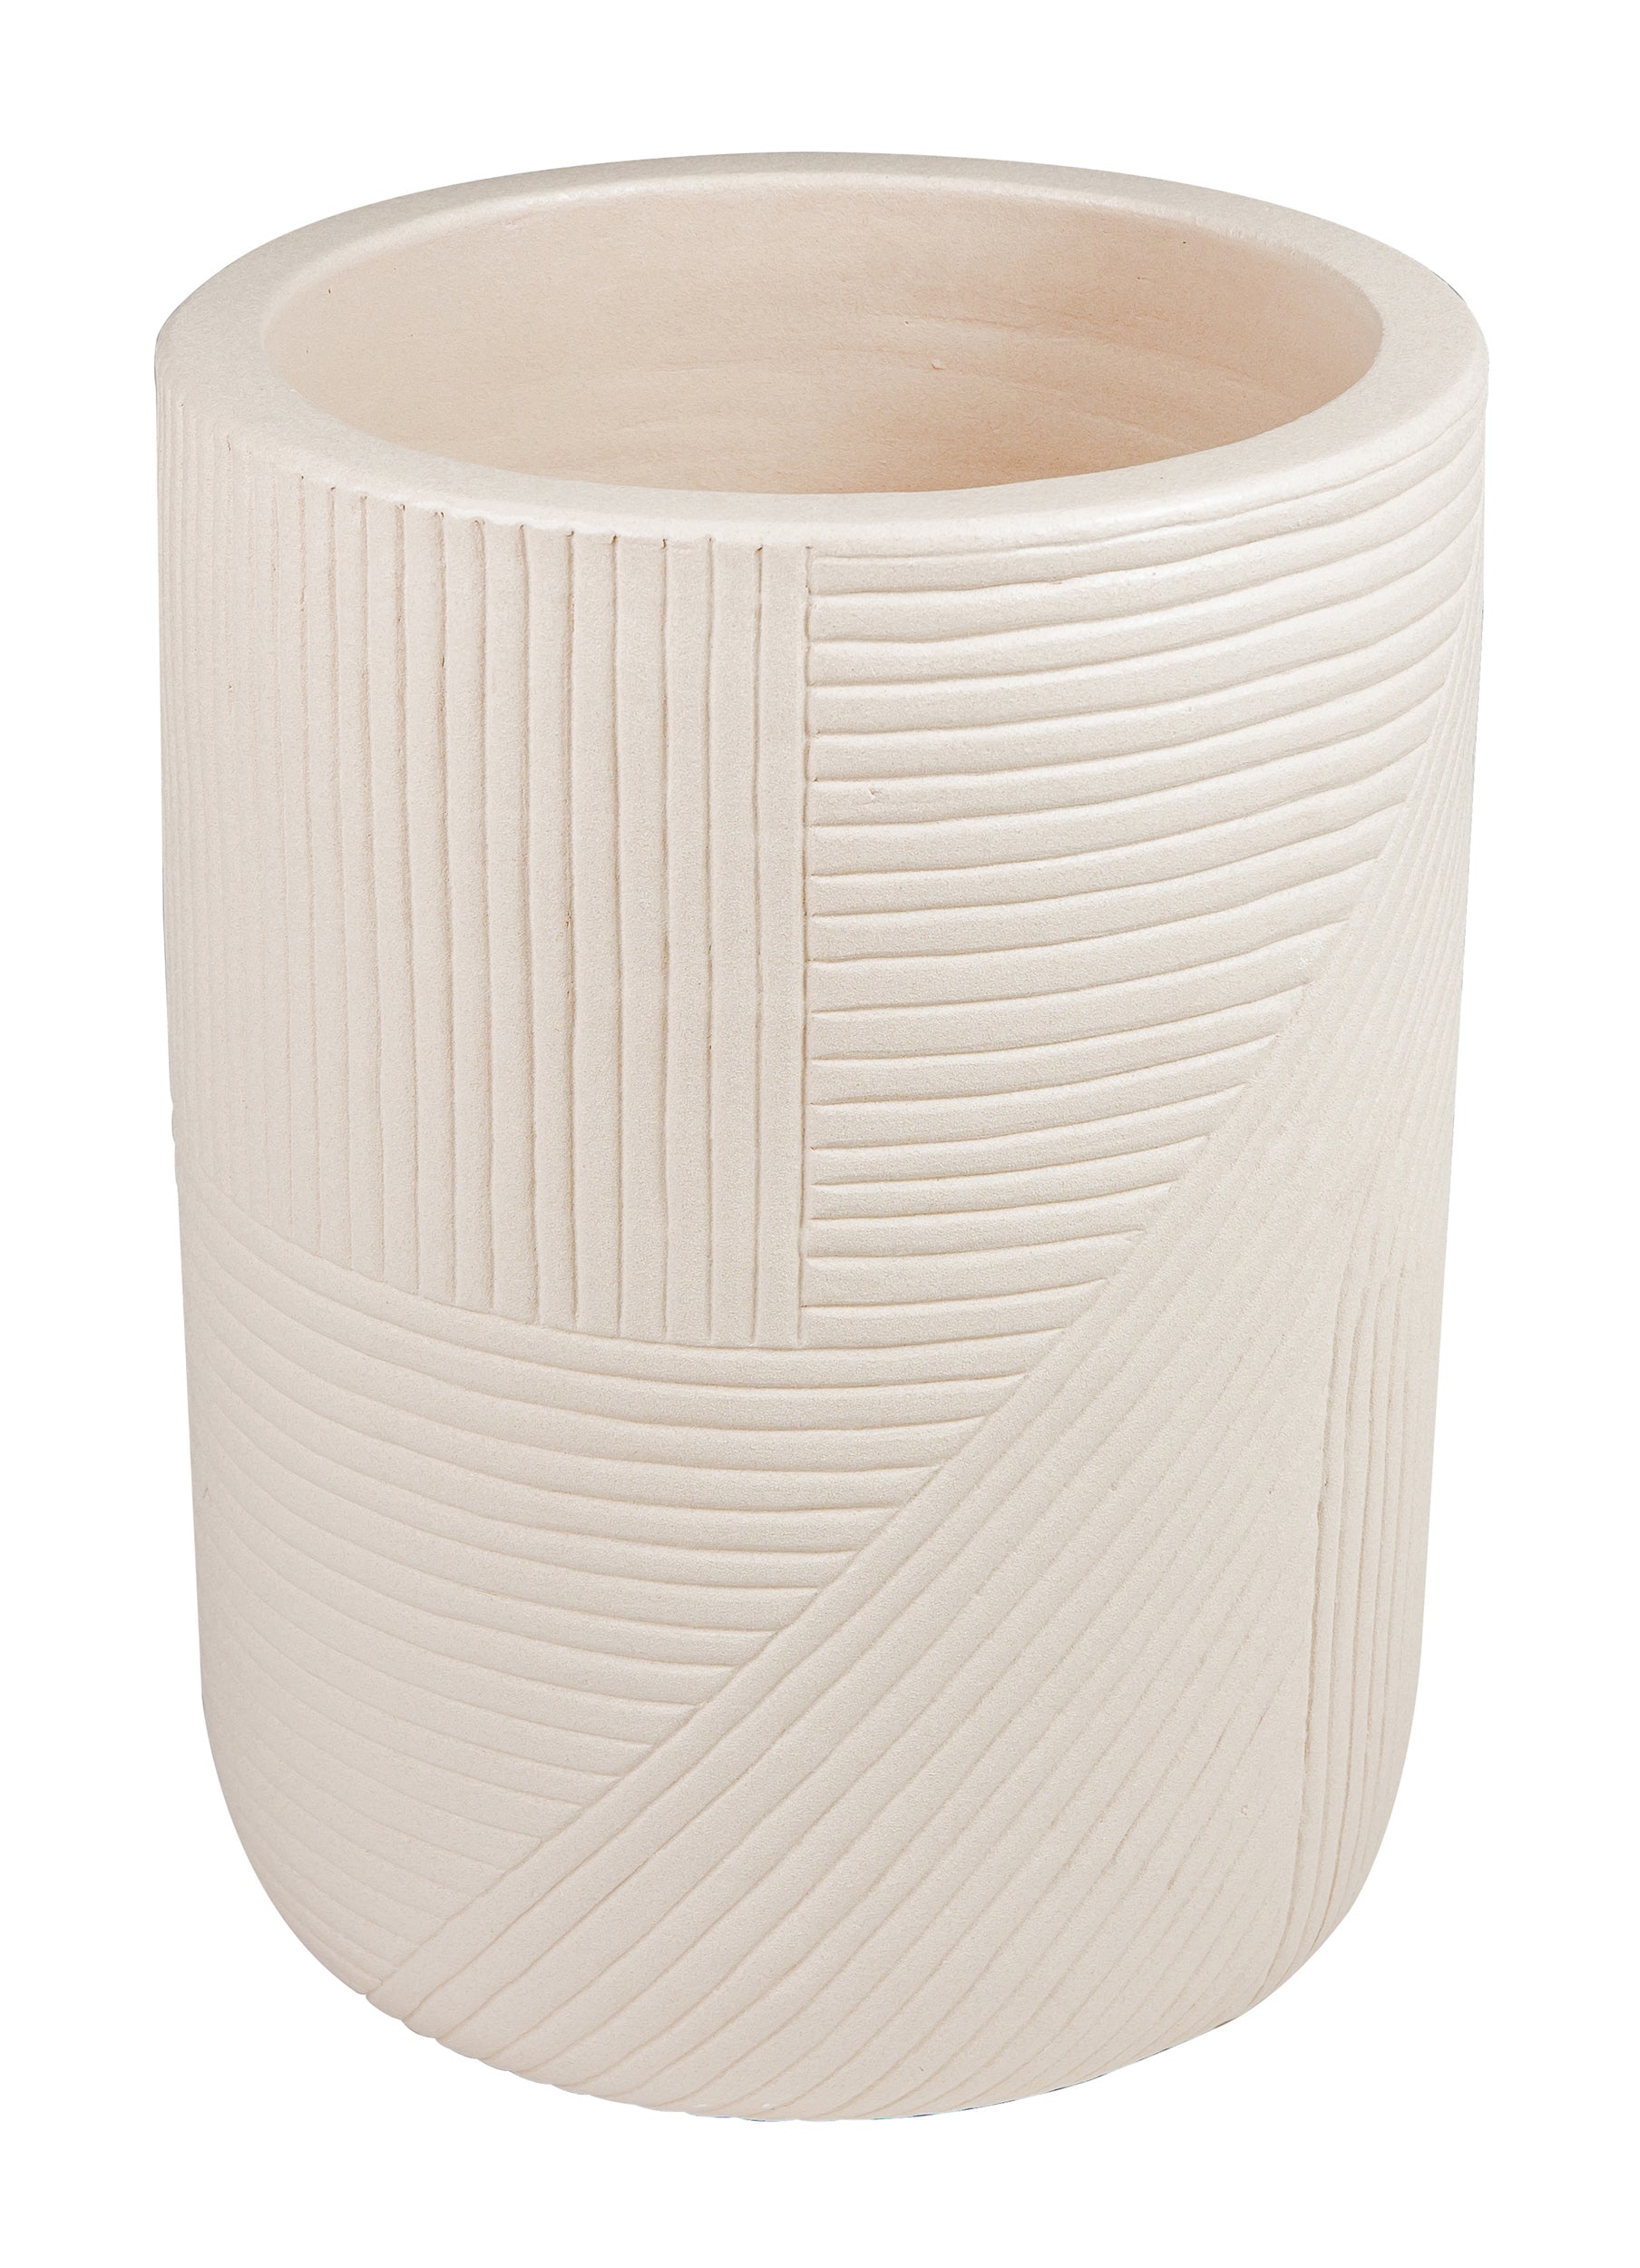 Serenity Textured Planter Set (1 Large and 1 Small) - White Outdoor Accessories-Outdoor Planters-Seasonal Living-LOOMLAN